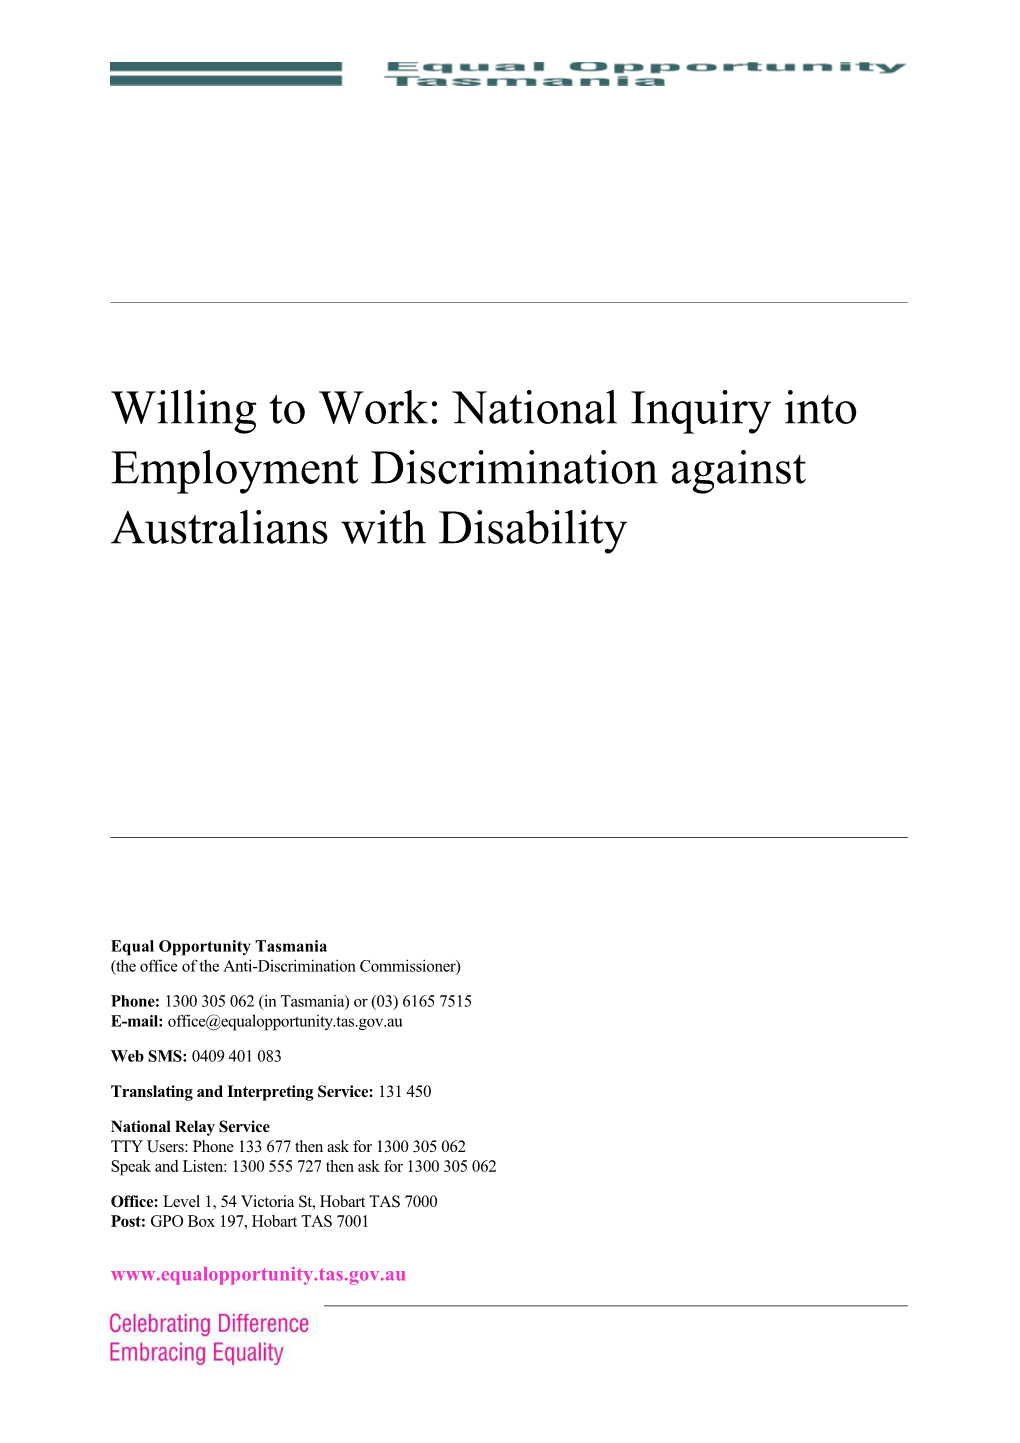 Willing to Work: National Inquiry Into Employment Discrimination Against Australians With